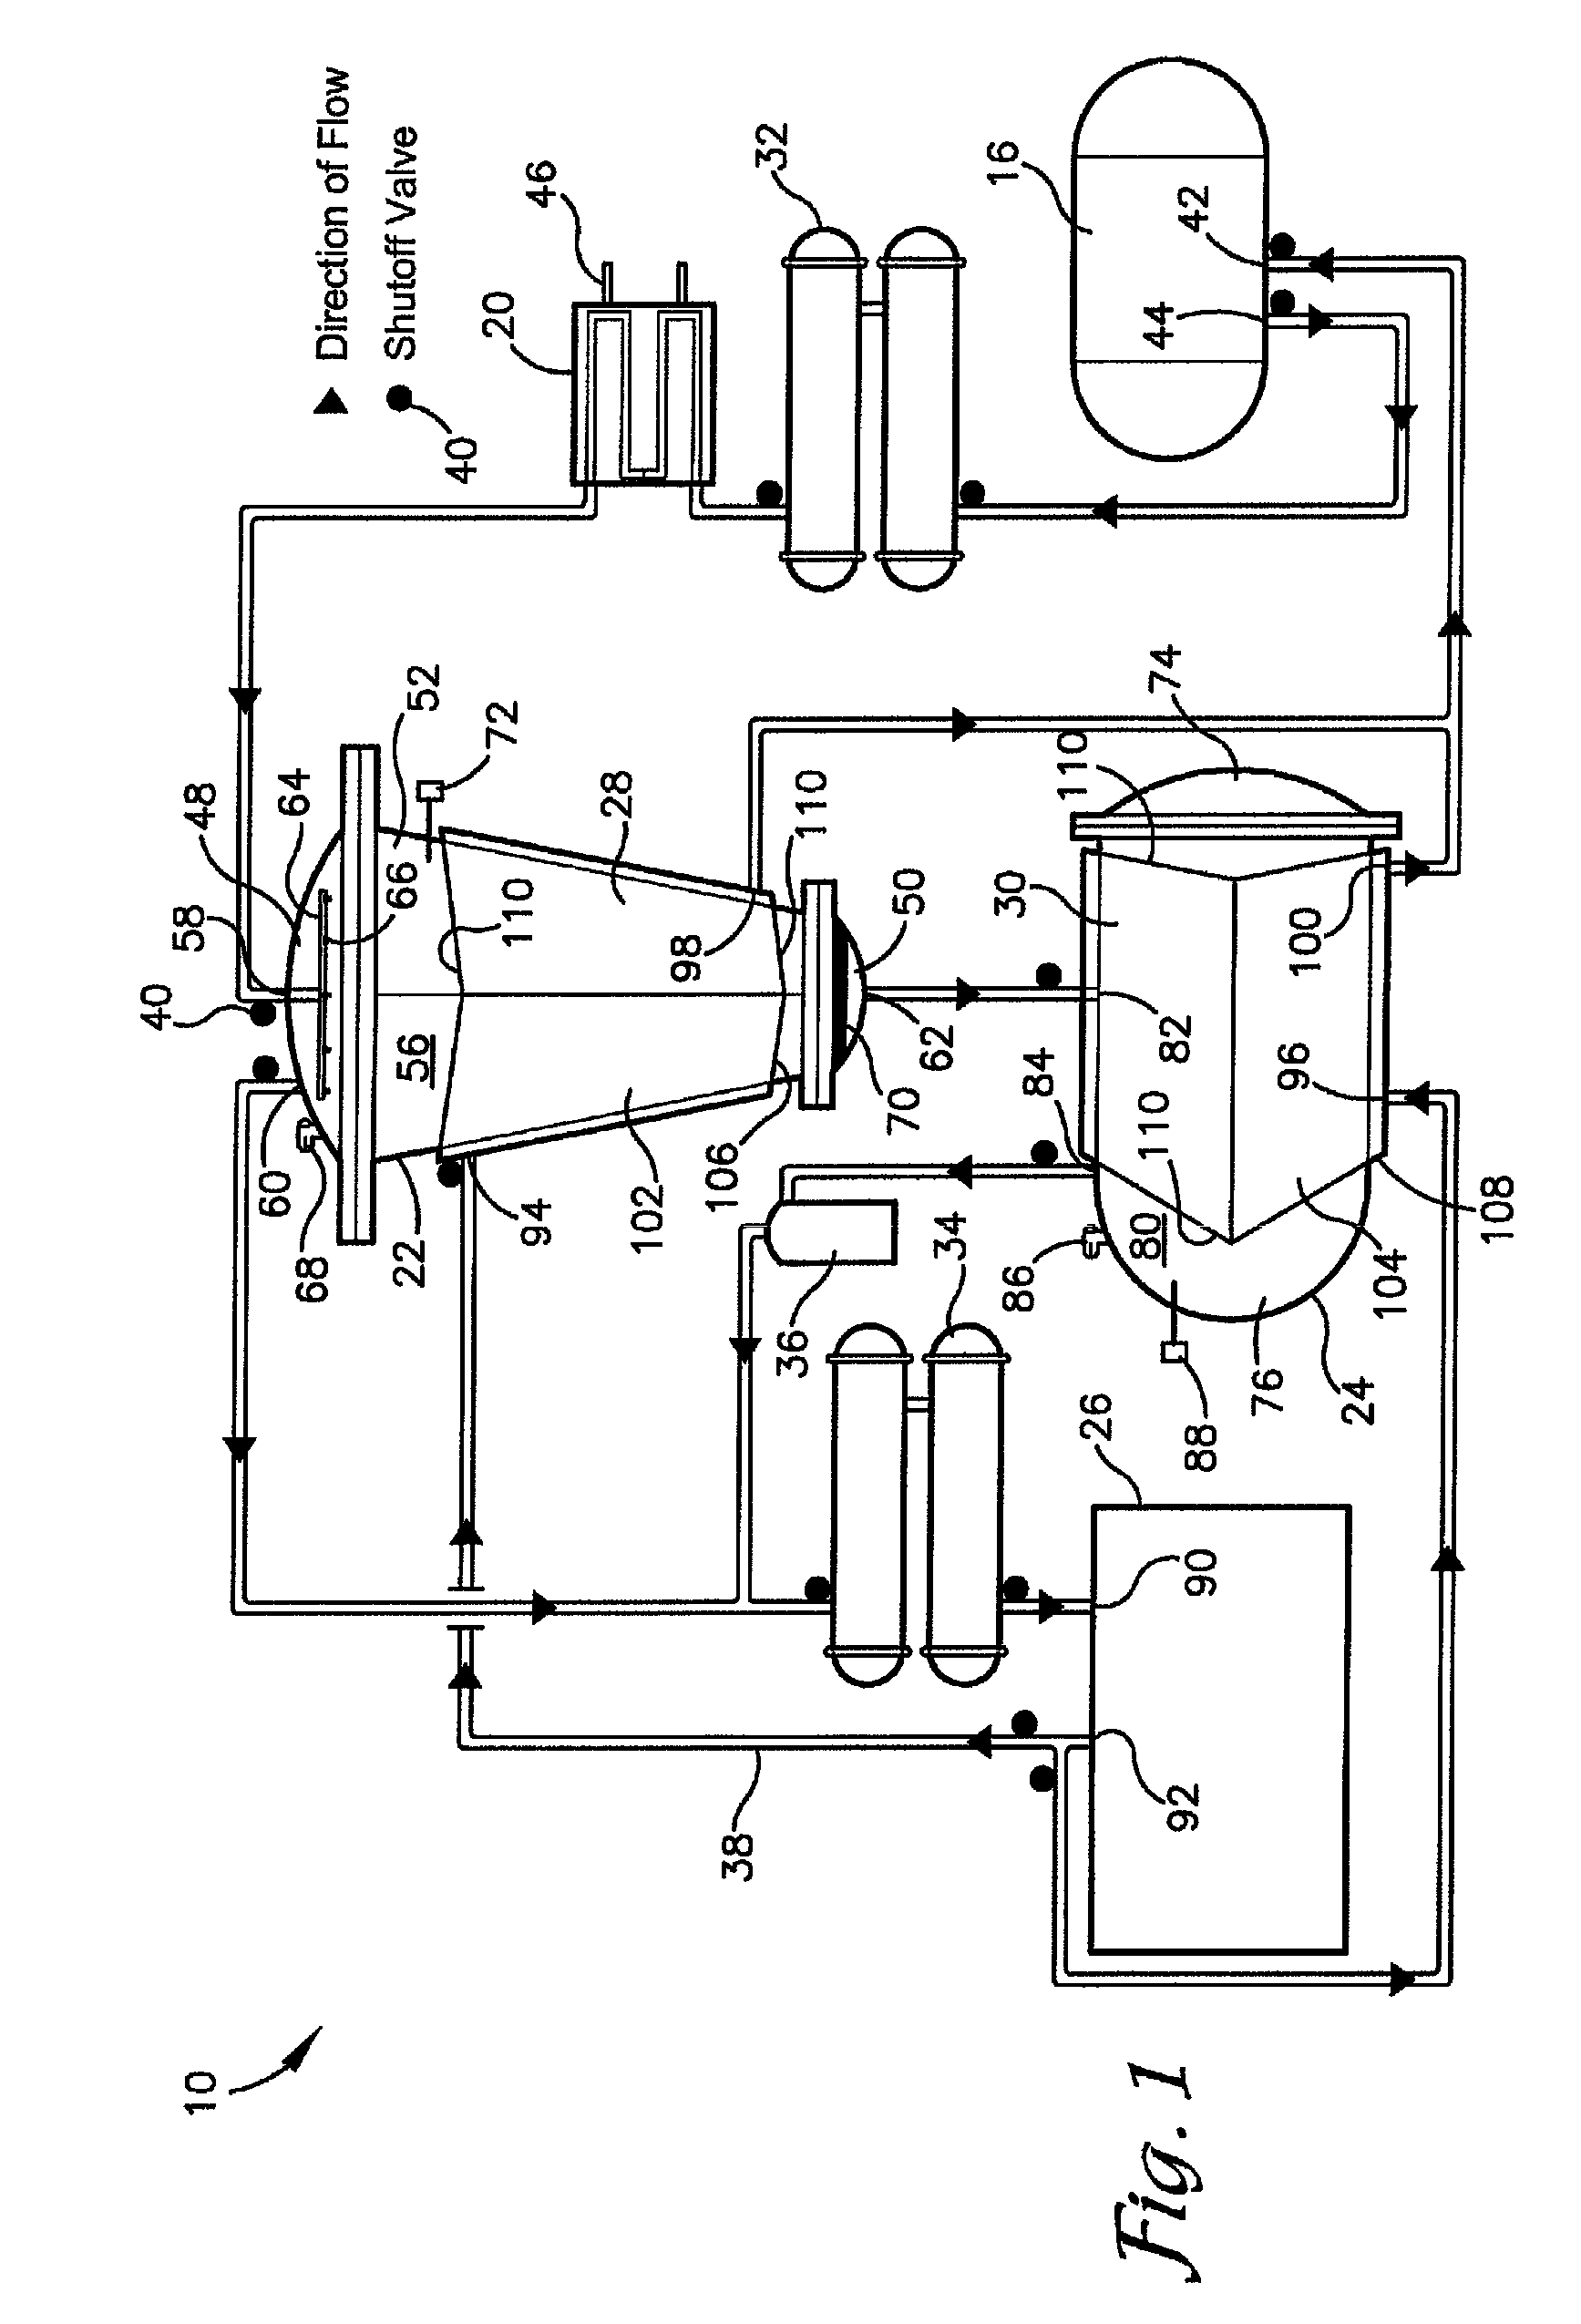 Apparatus and method for oil and fat extraction